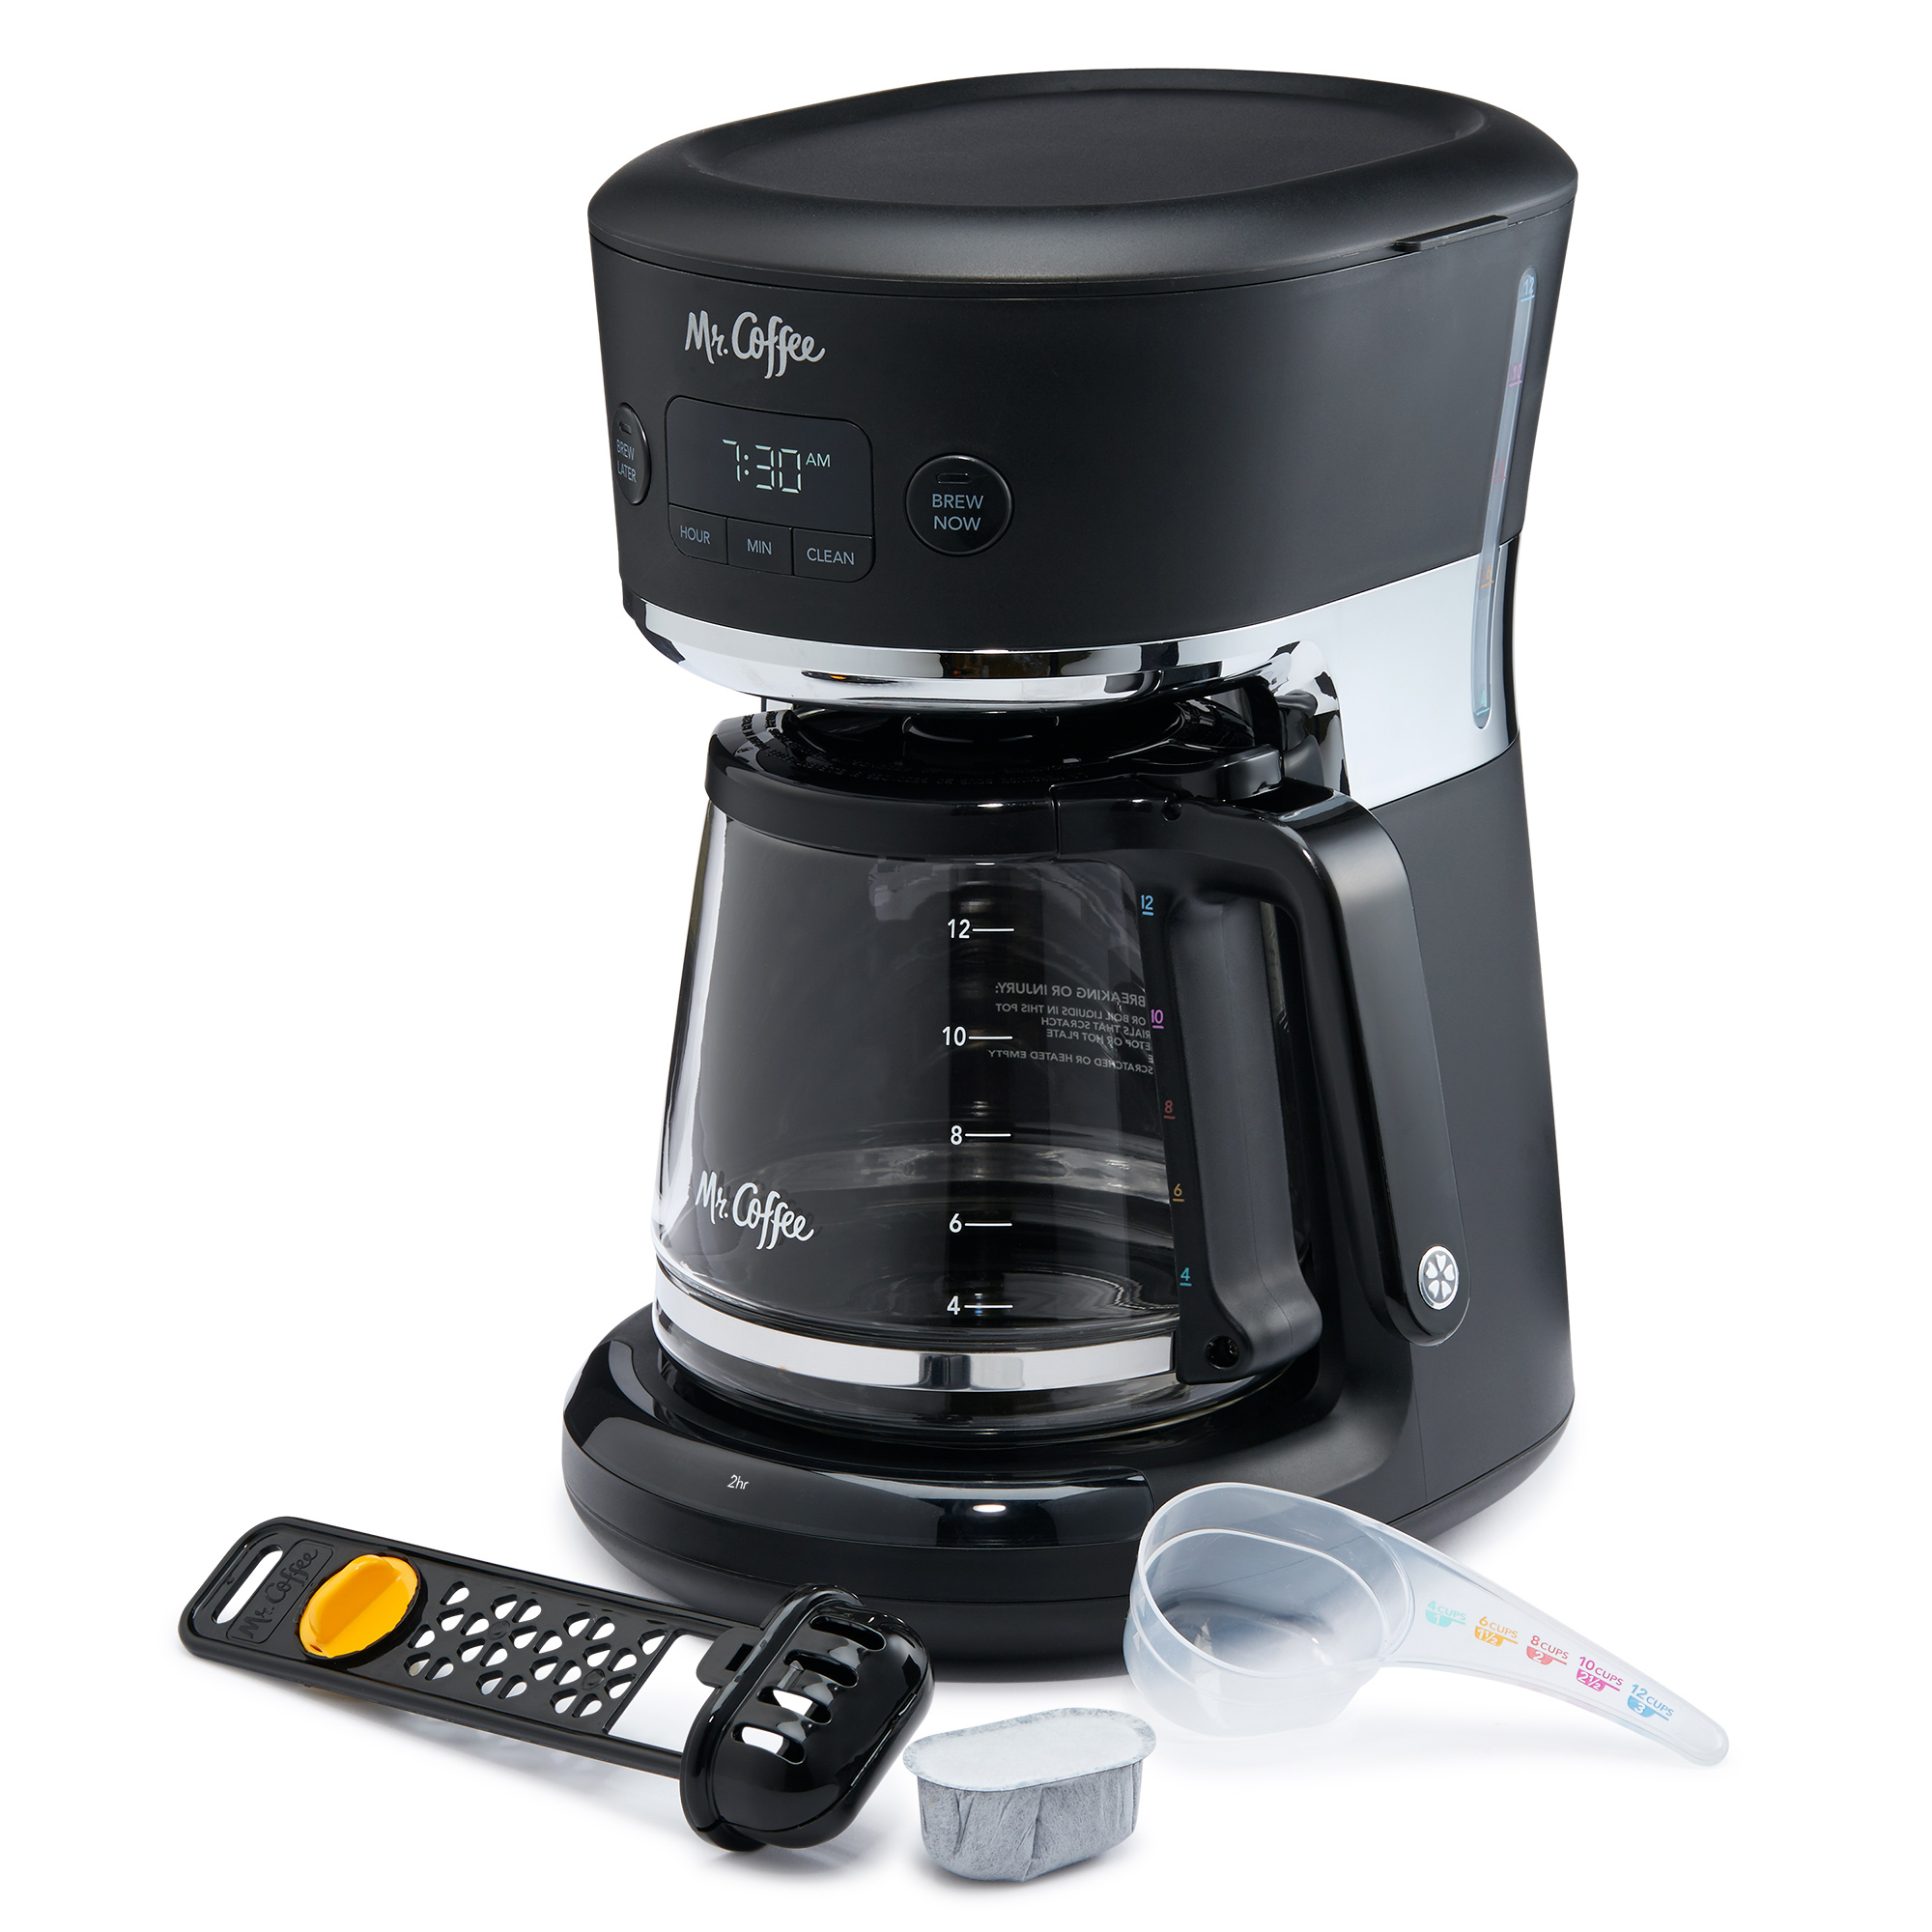 Mr. Coffee Easy Measure 12-Cup Programmable Coffee Maker, Black - image 1 of 3